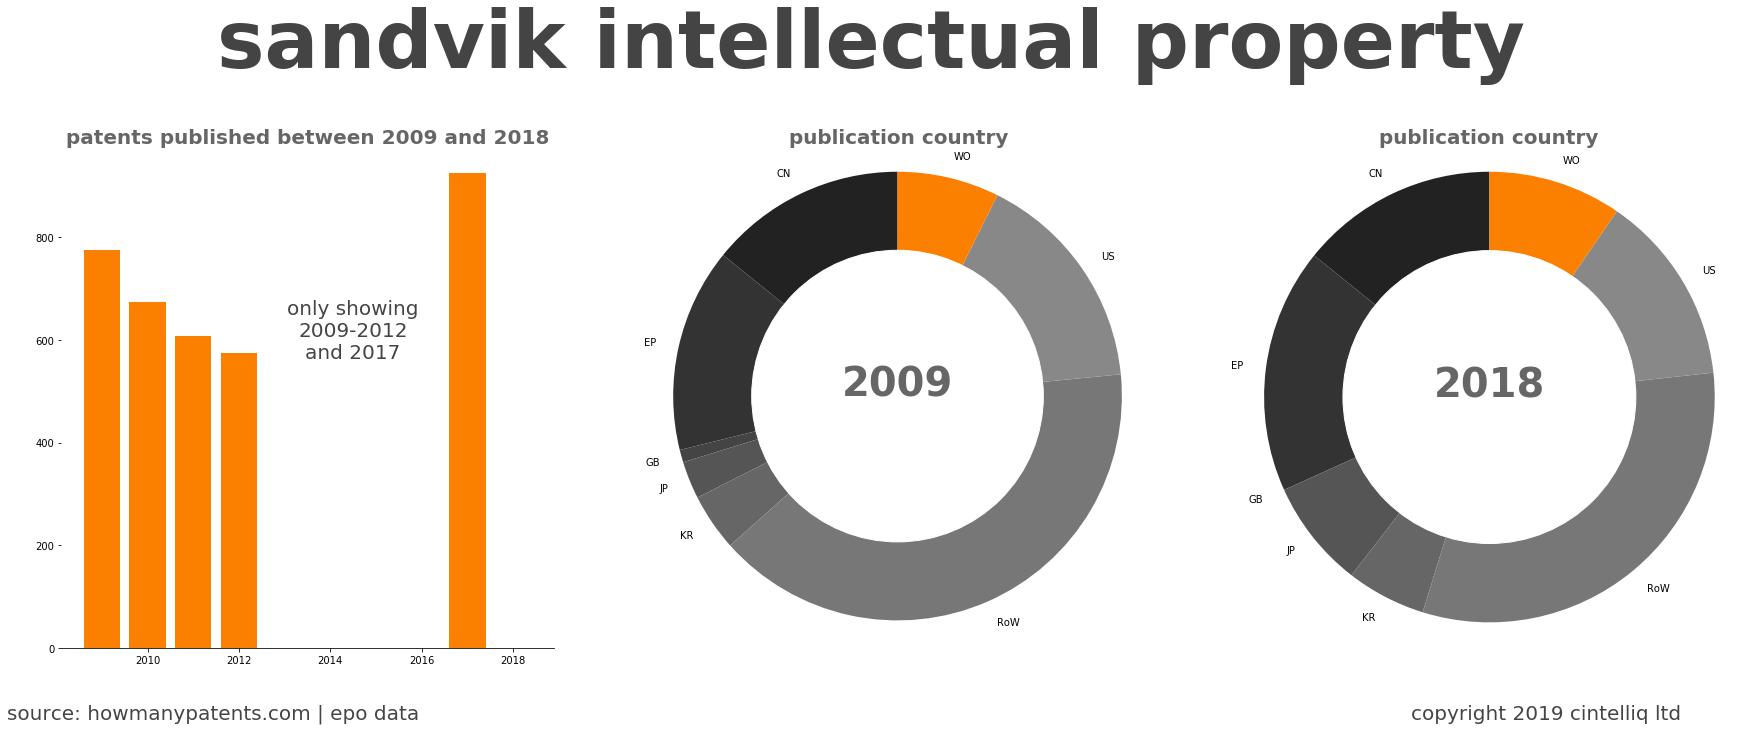 summary of patents for Sandvik Intellectual Property